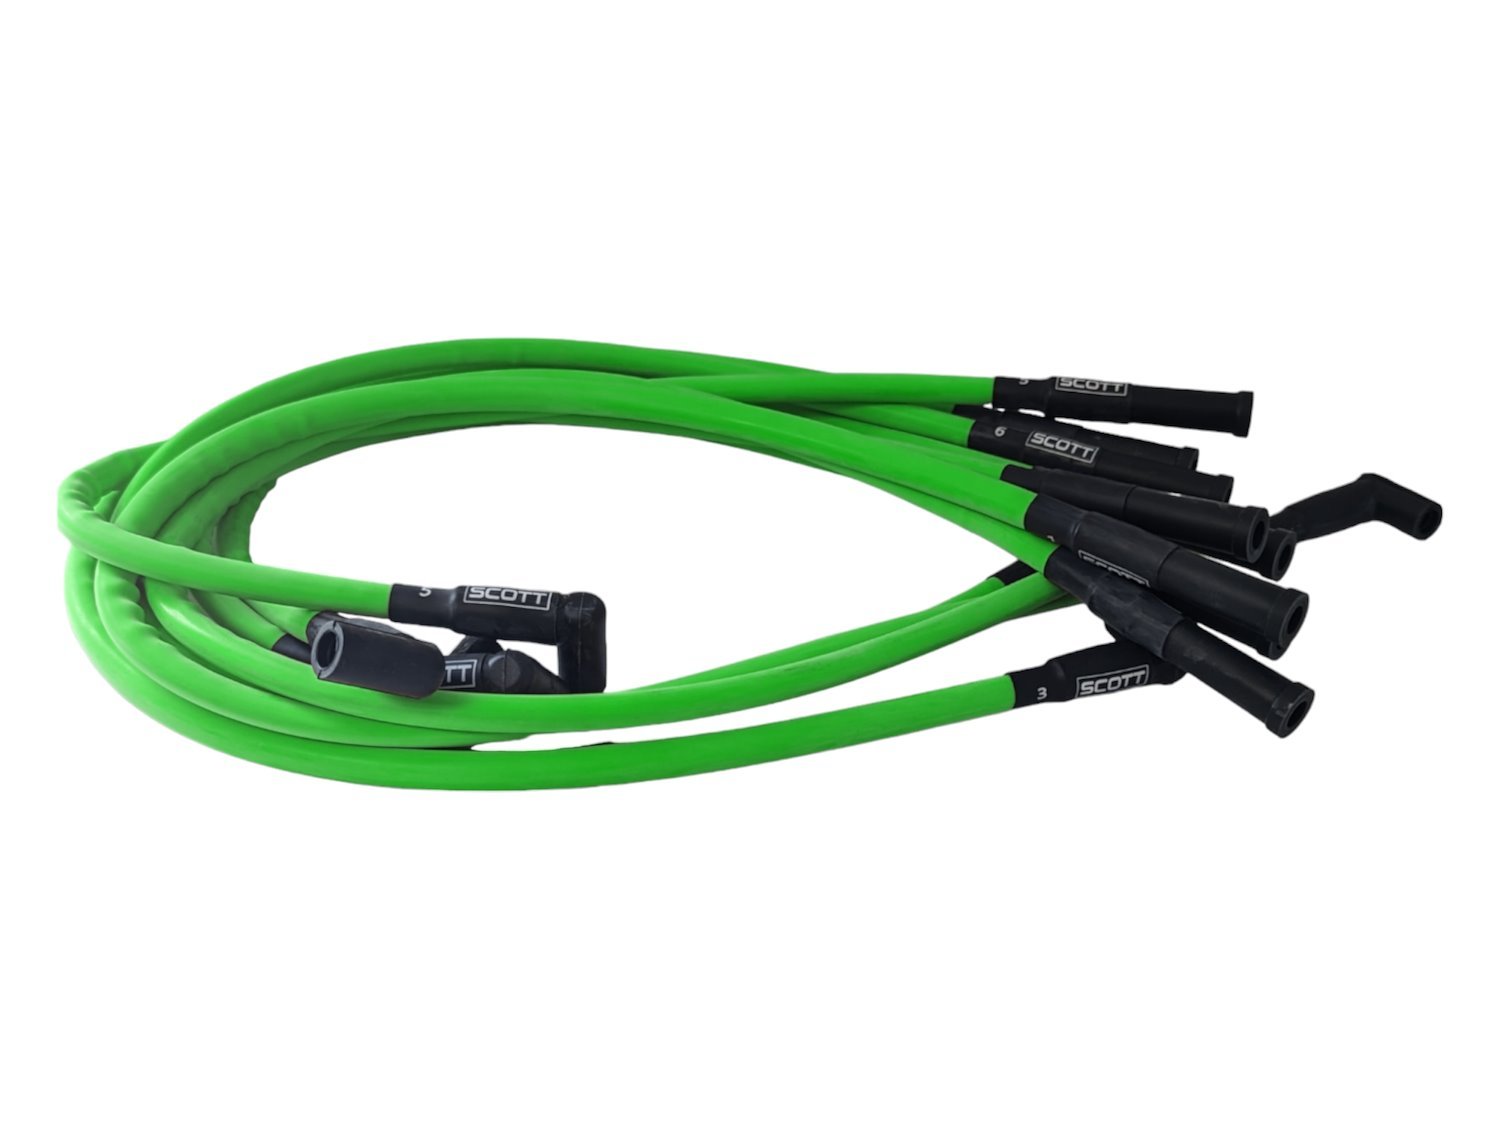 SPW300-CH-428-8 Super Mag Fiberglass-Oversleeved Spark Plug Wire Set for Big Block Ford FE [Fluorescent Green]